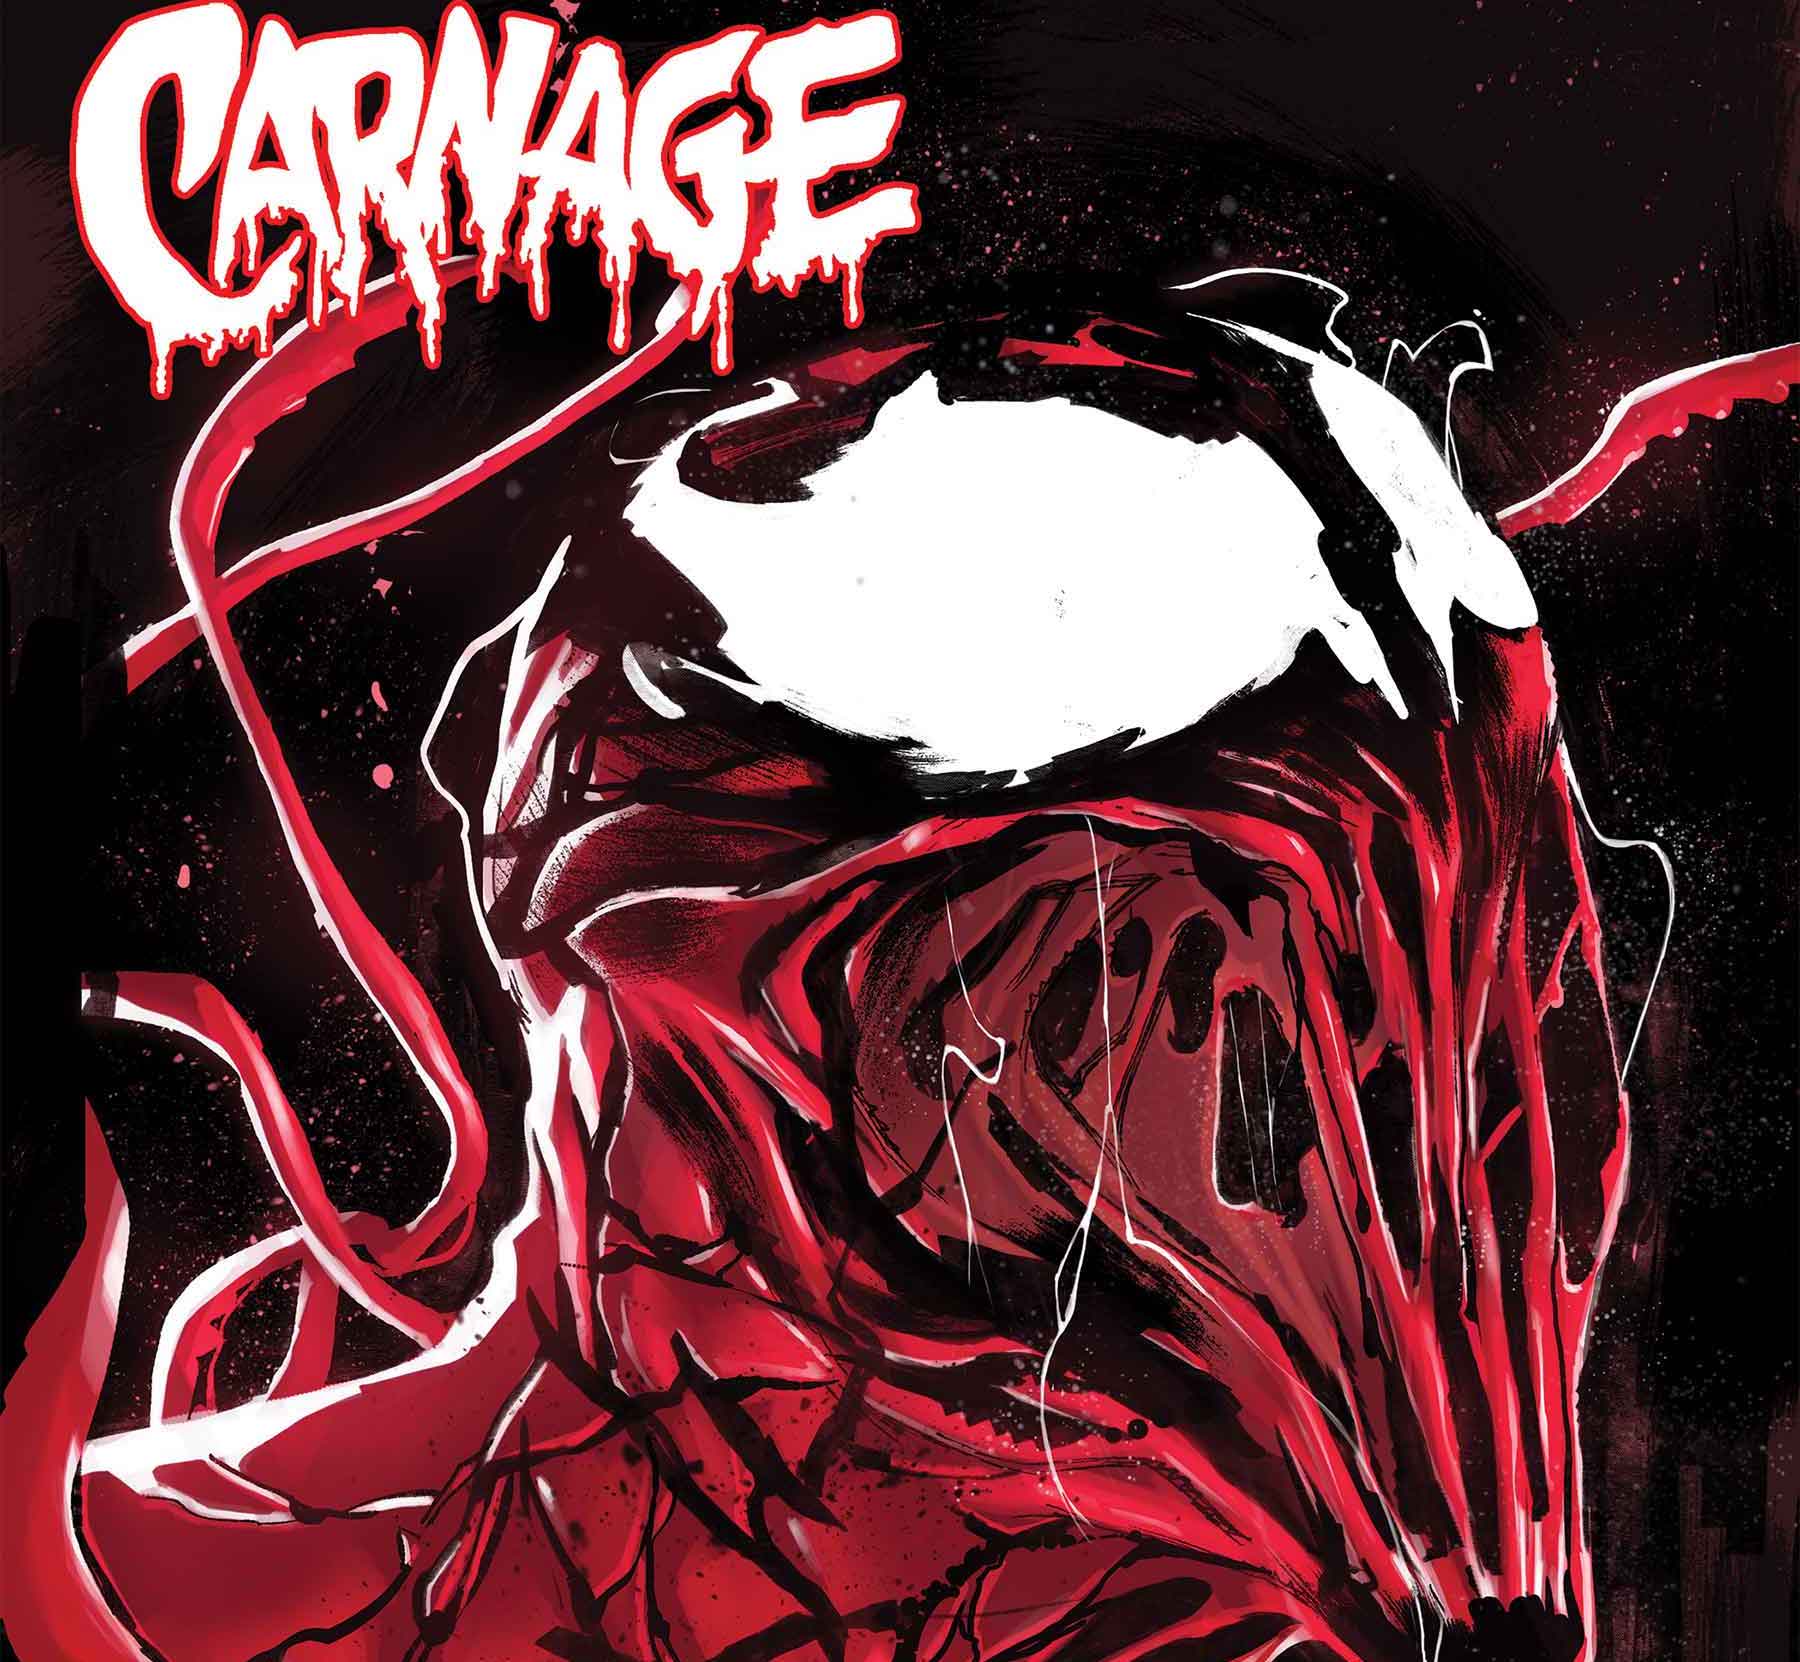 Marvel to launch 'Carnage: Black, White & Blood' #1 in March